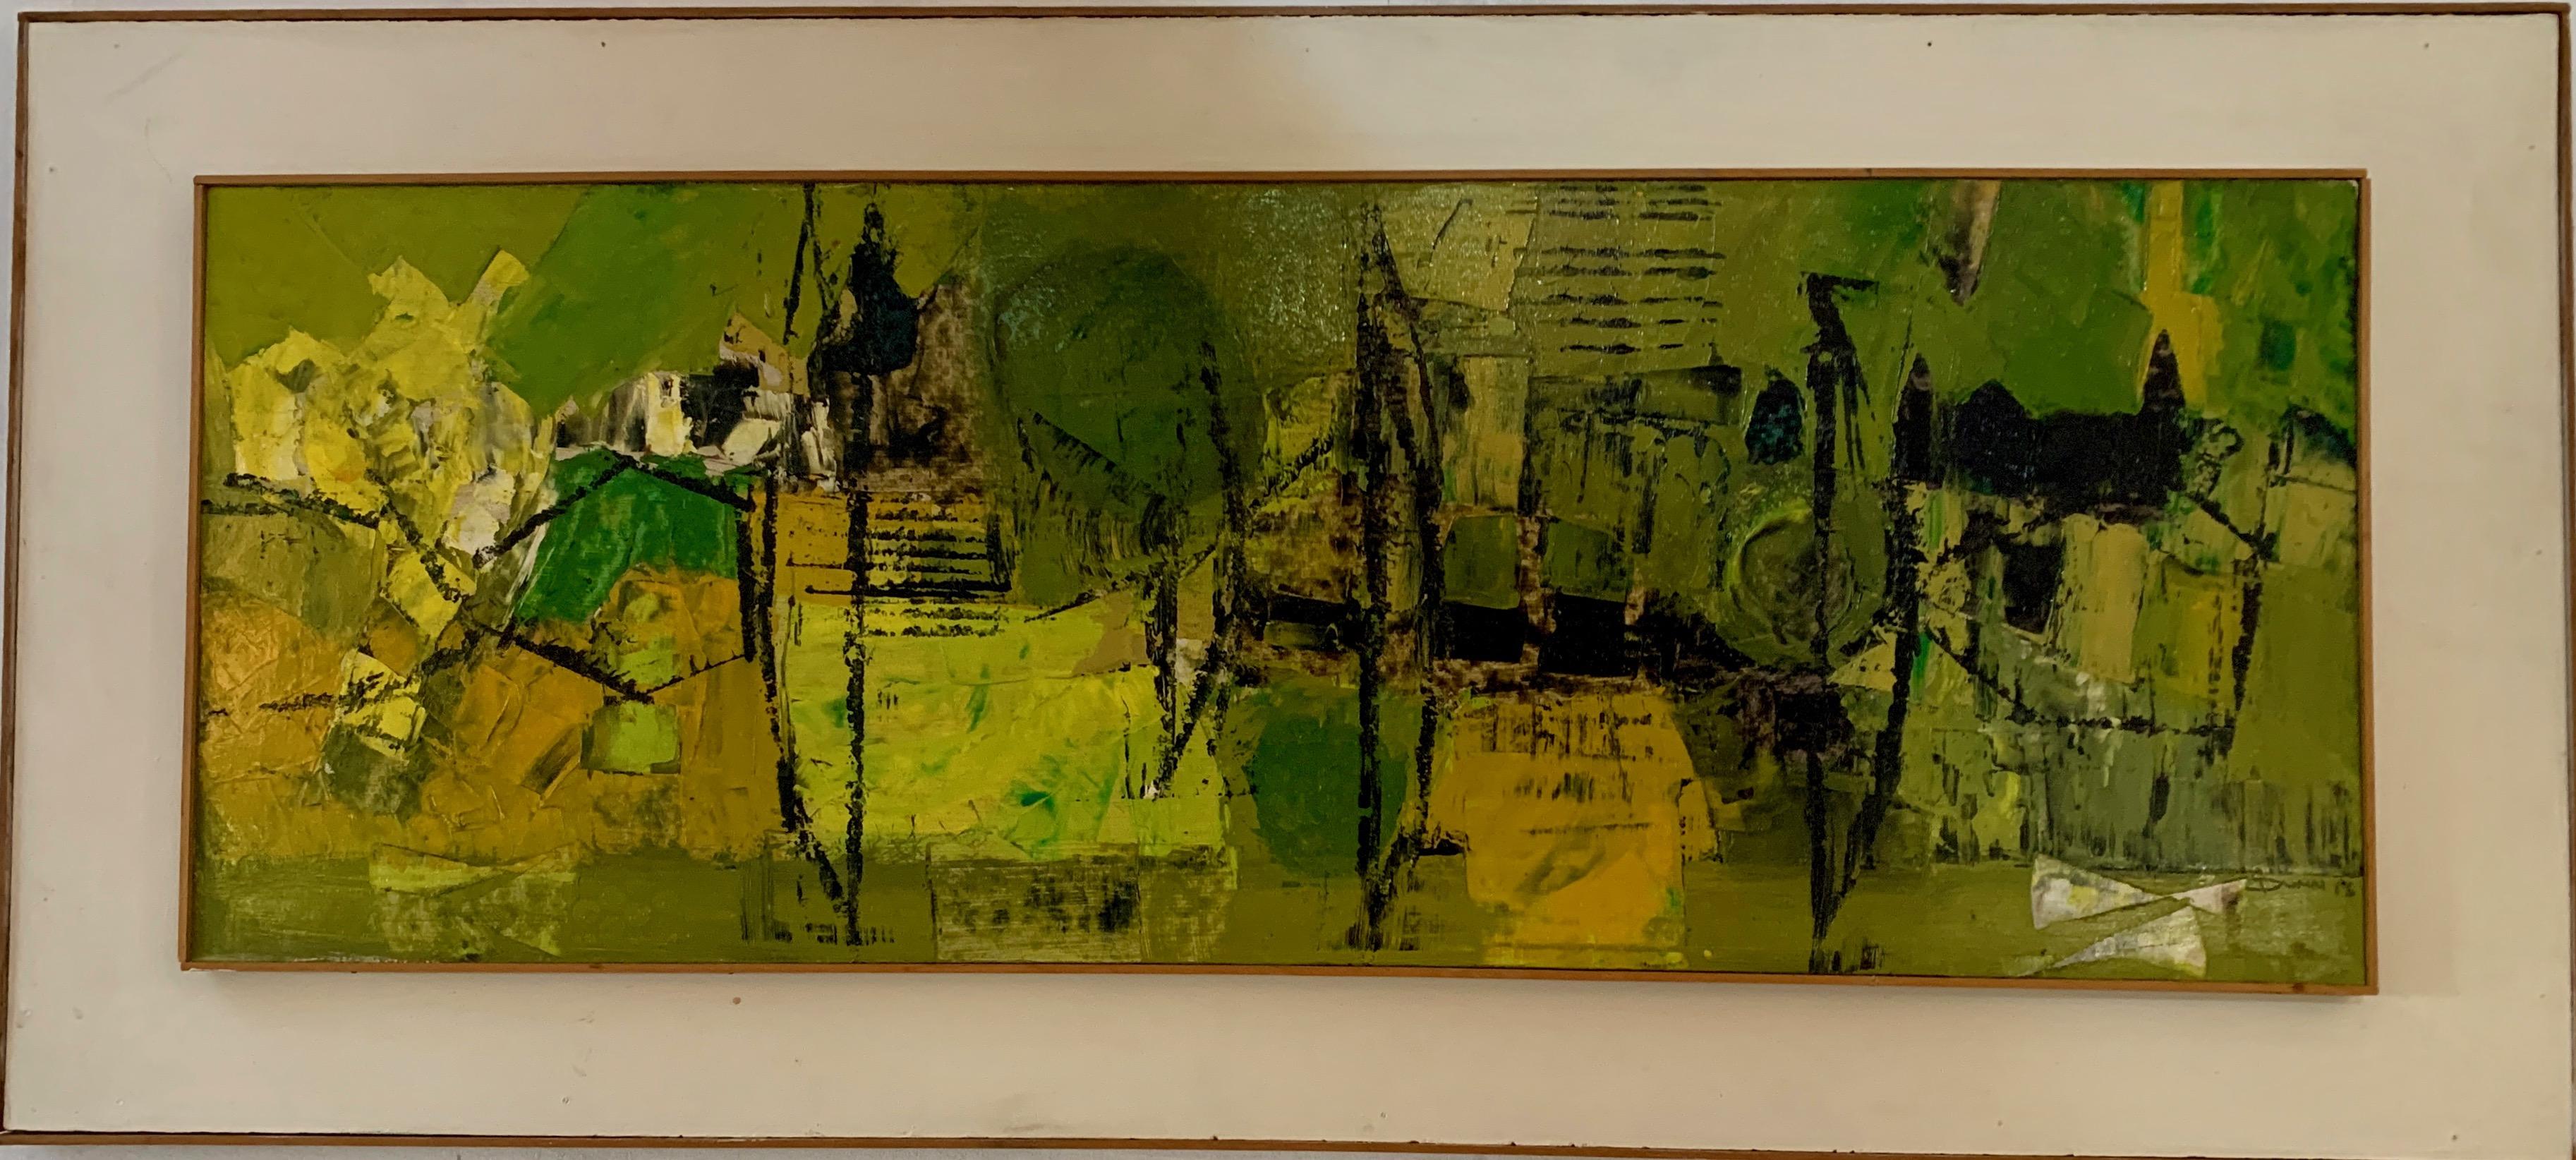 Robert Dunn Abstract Painting - 1960's English Abstract view of a city